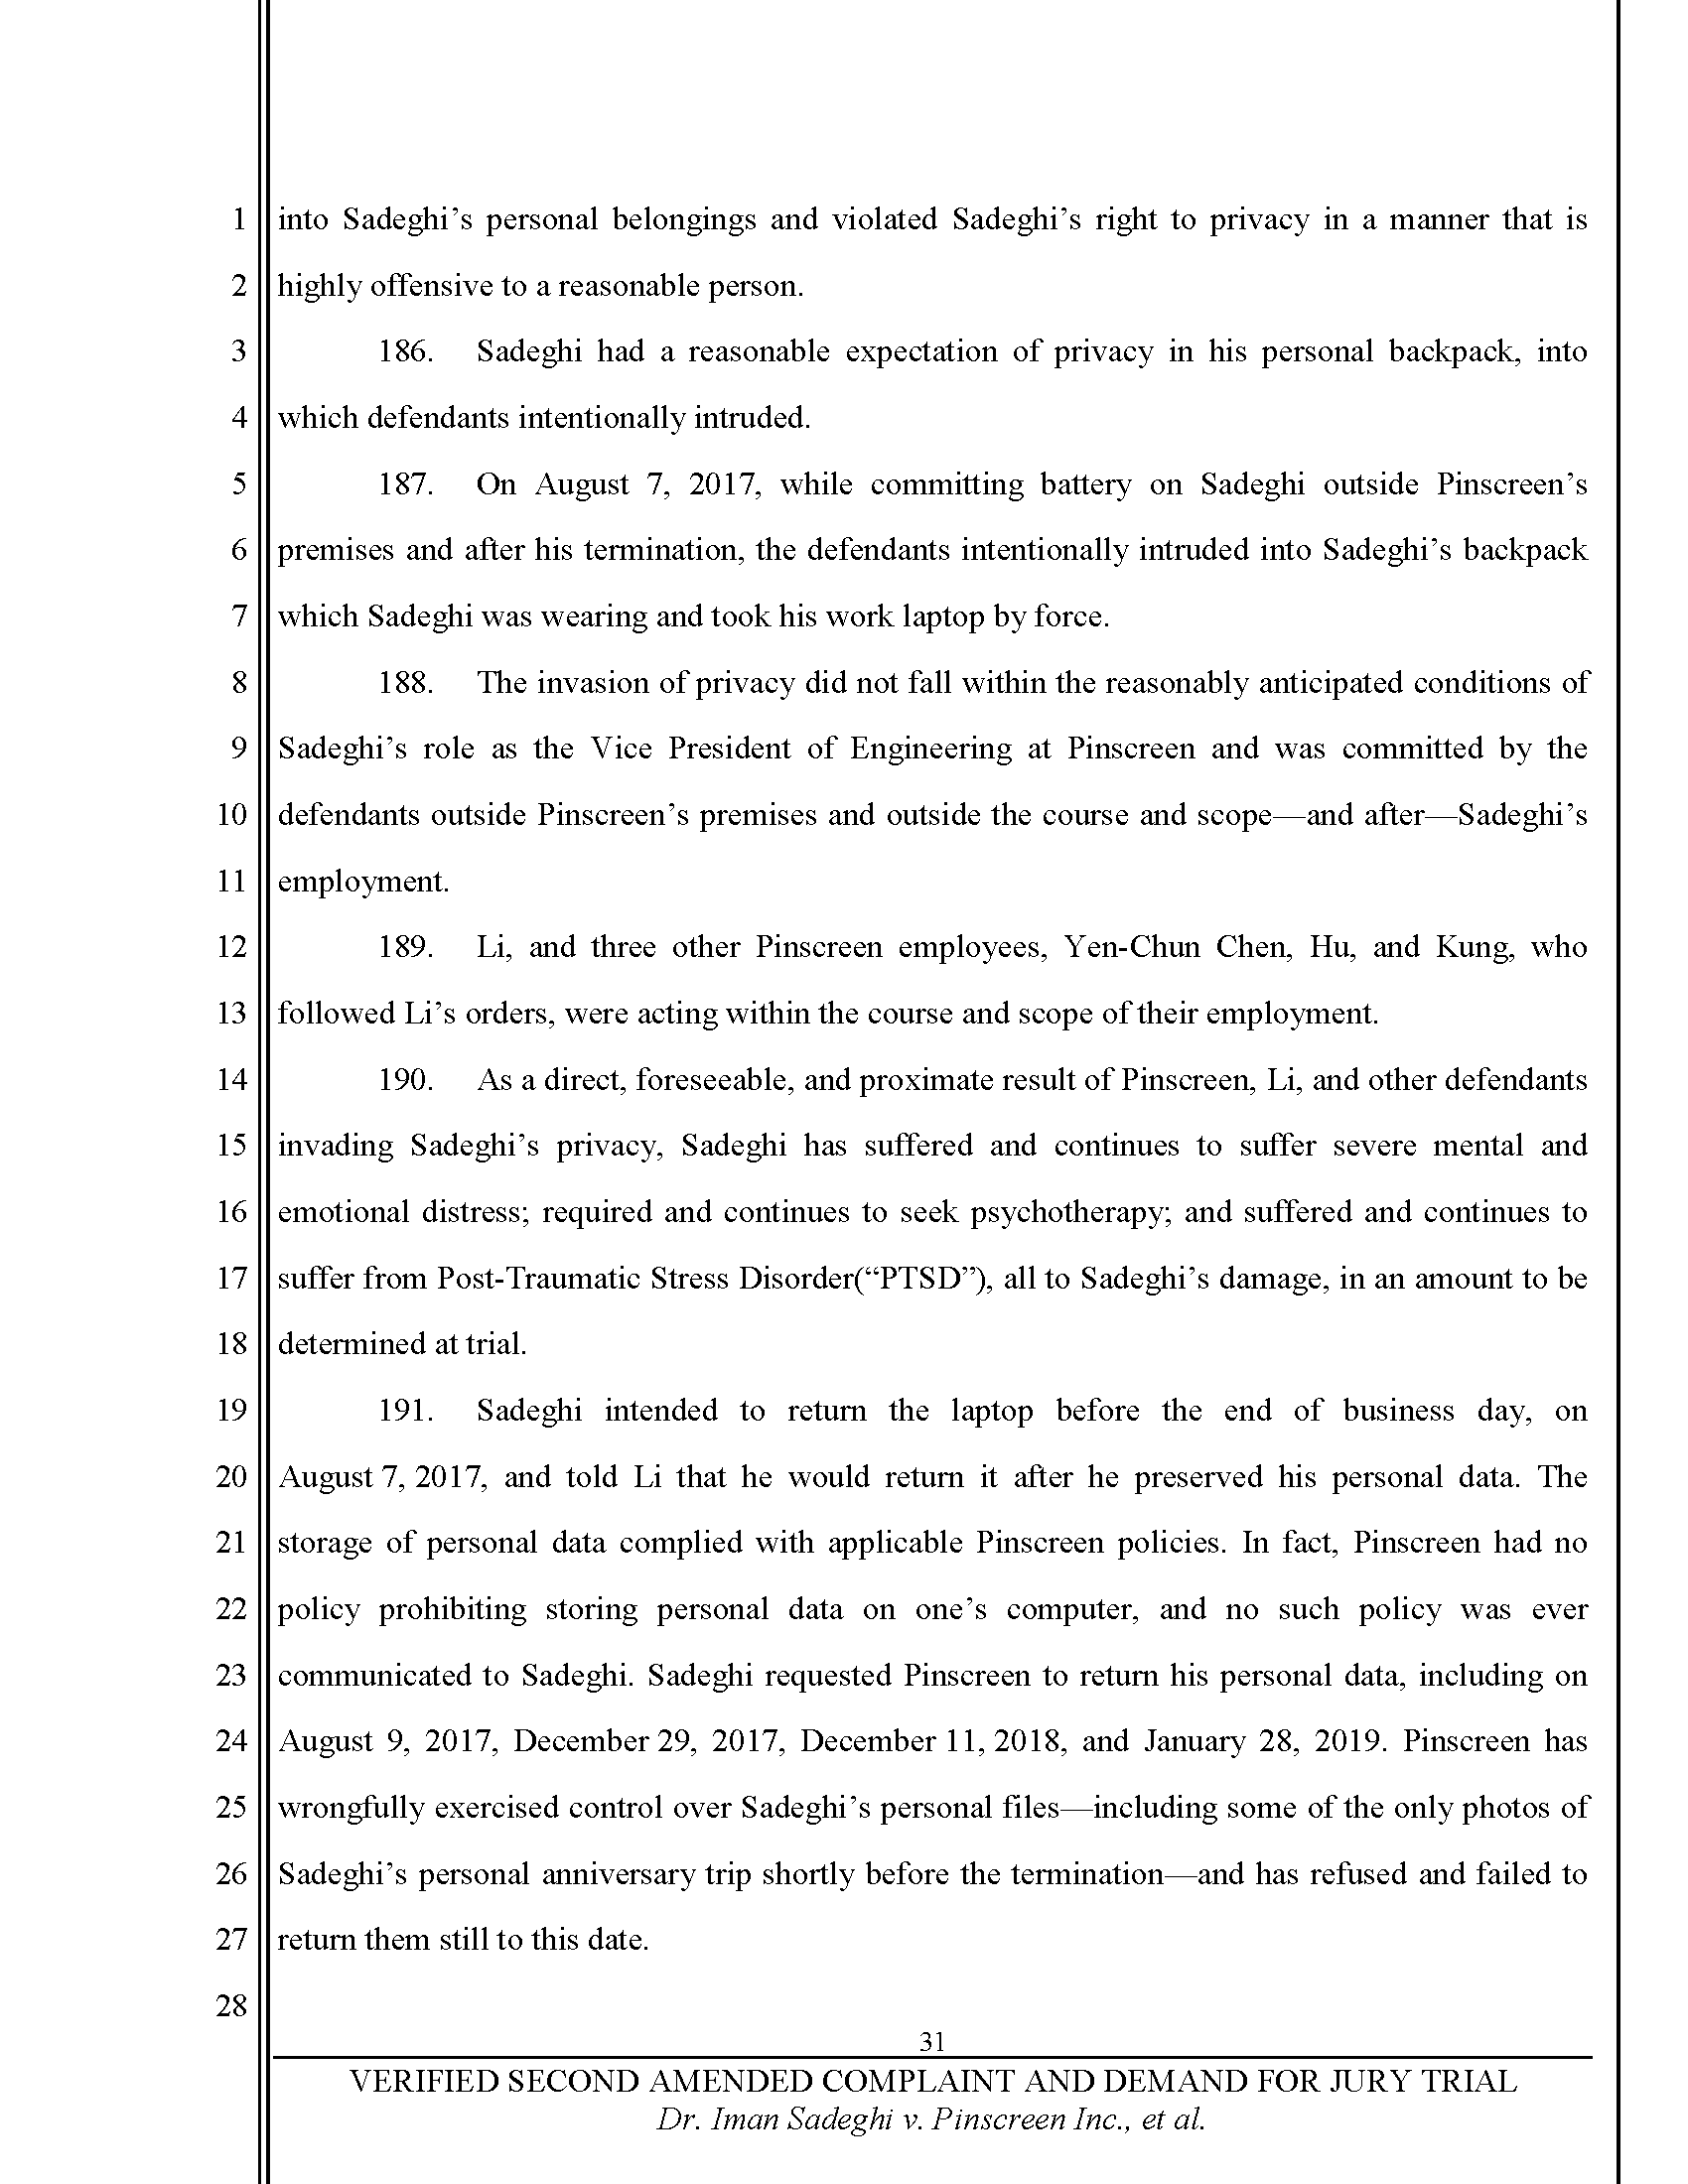 Second Amended Complaint (SAC) Page 32